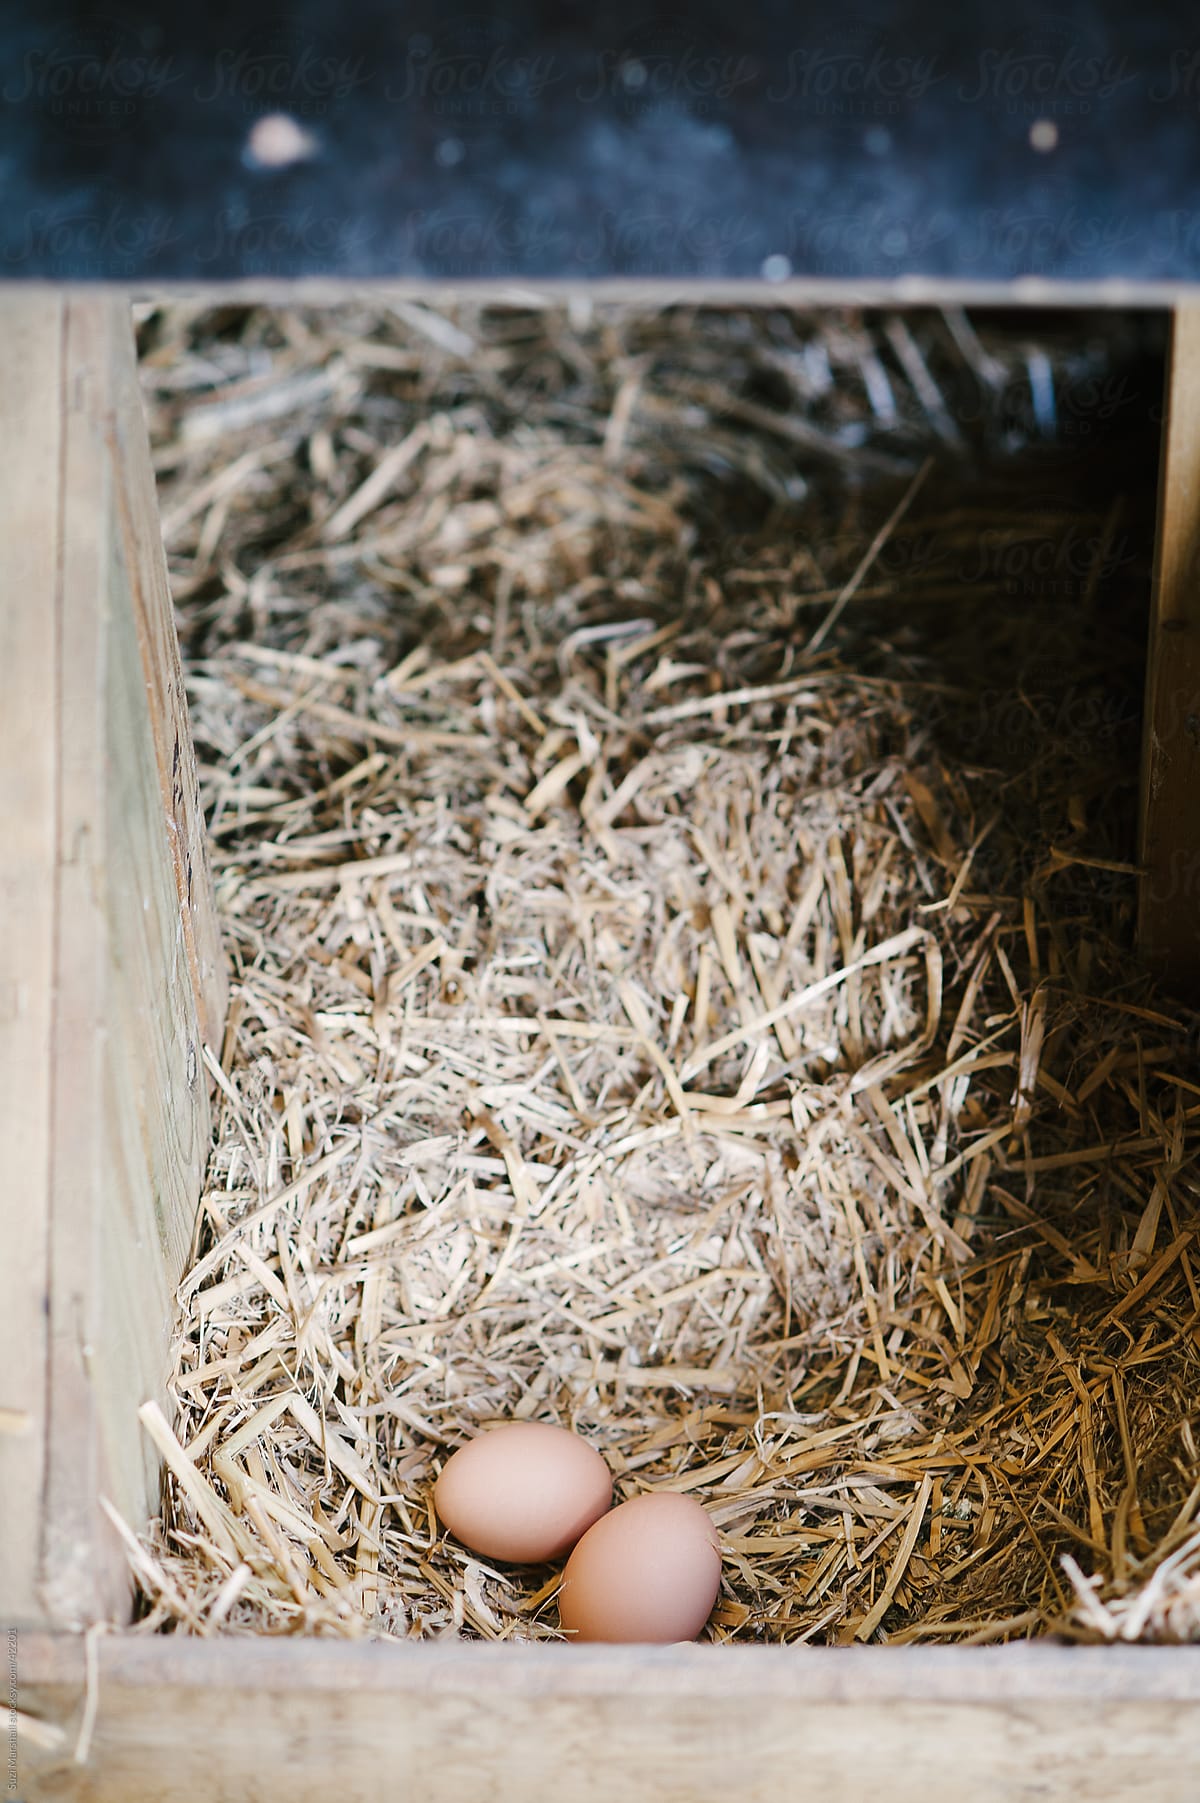 Freshly laid eggs on straw in a chicken coop